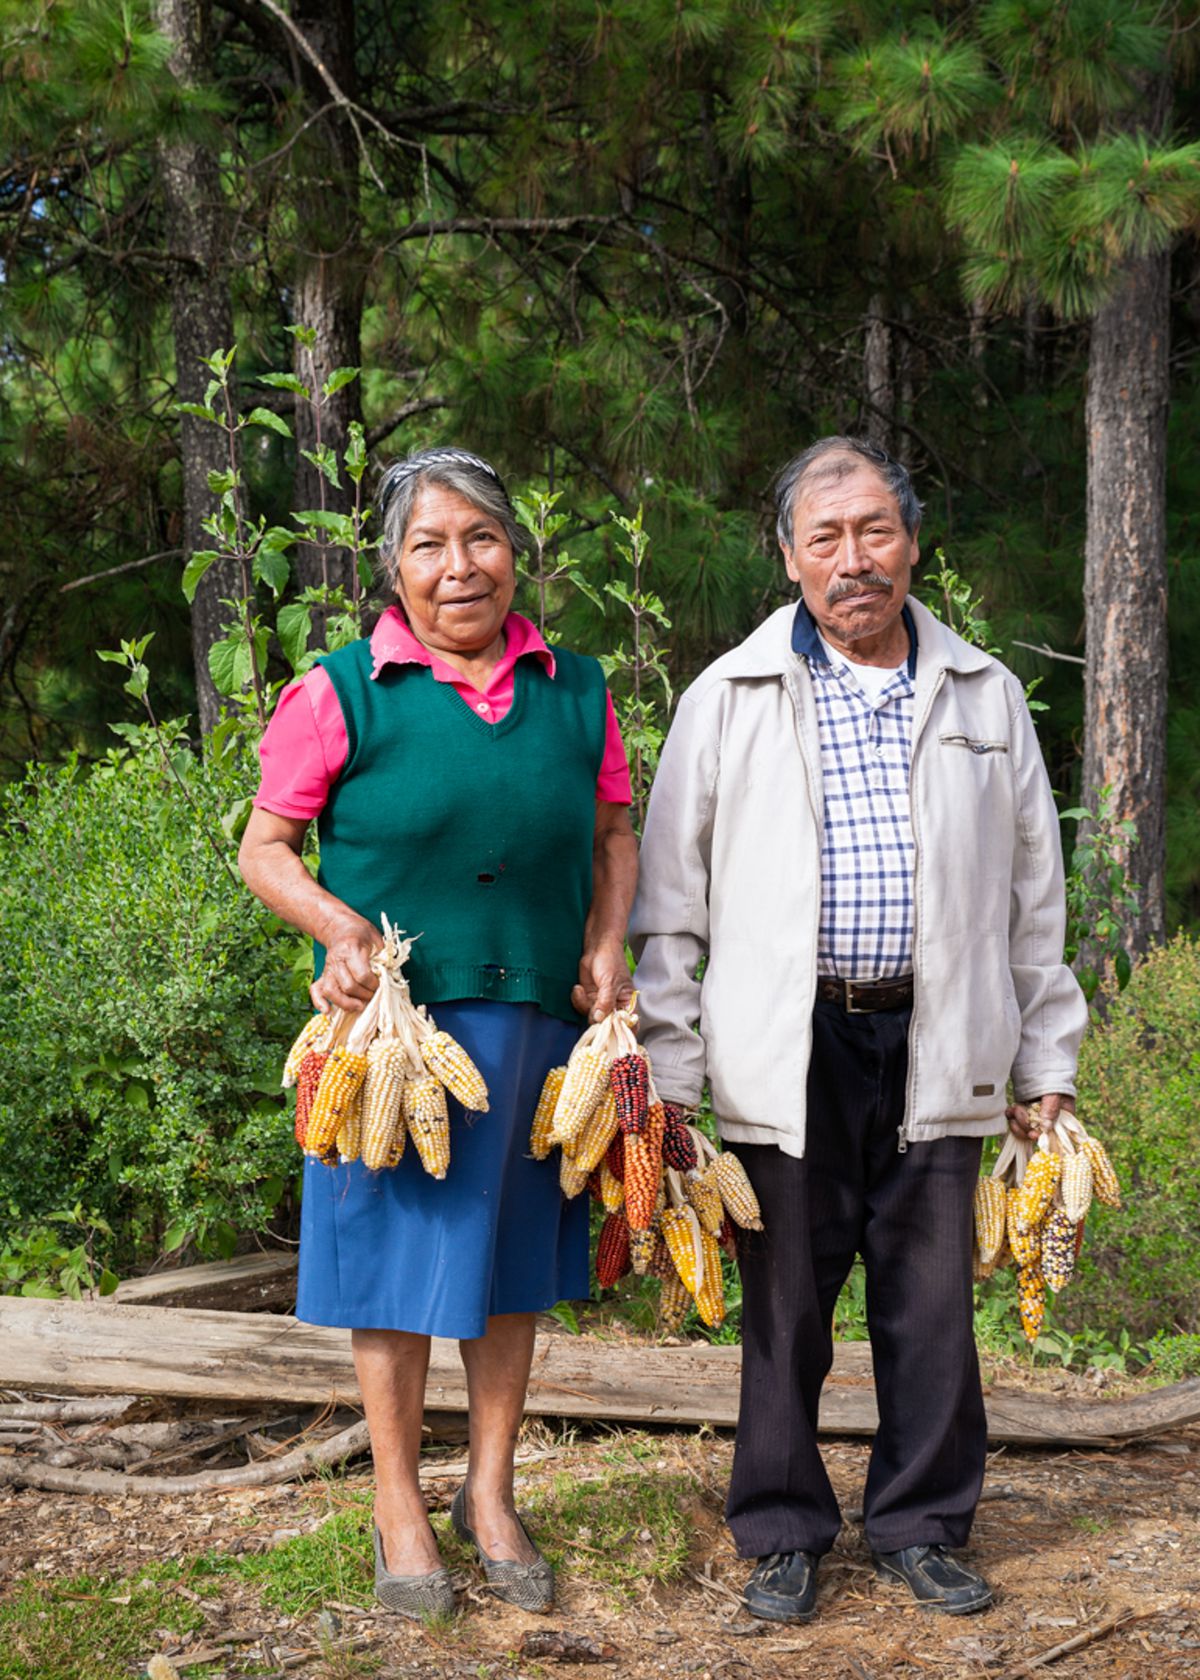 Man and woman standing next to each other, each holding several ears of shucked corn.